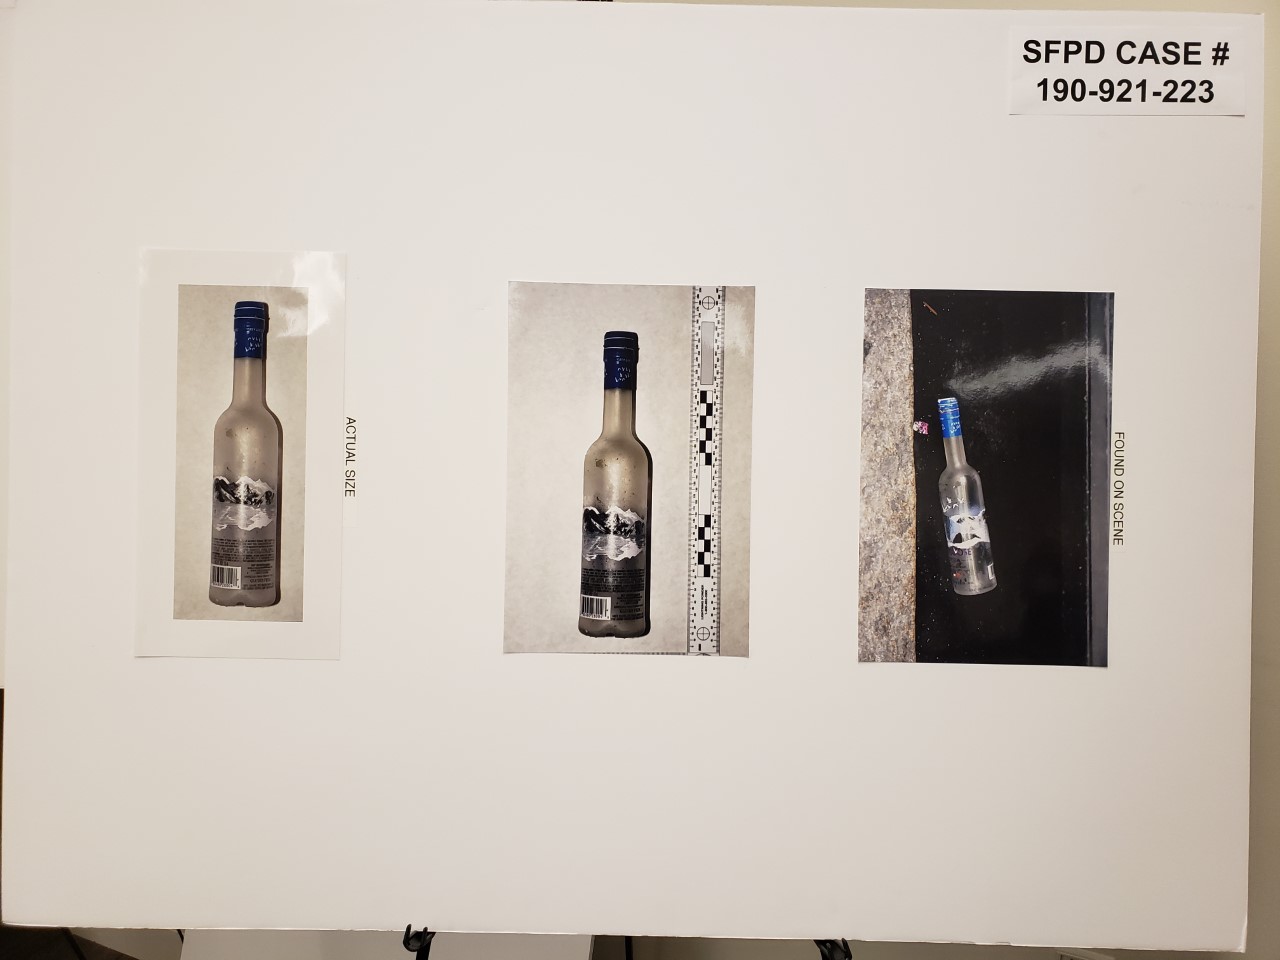 Photo of Weapon from SFPD Case #190-921-223